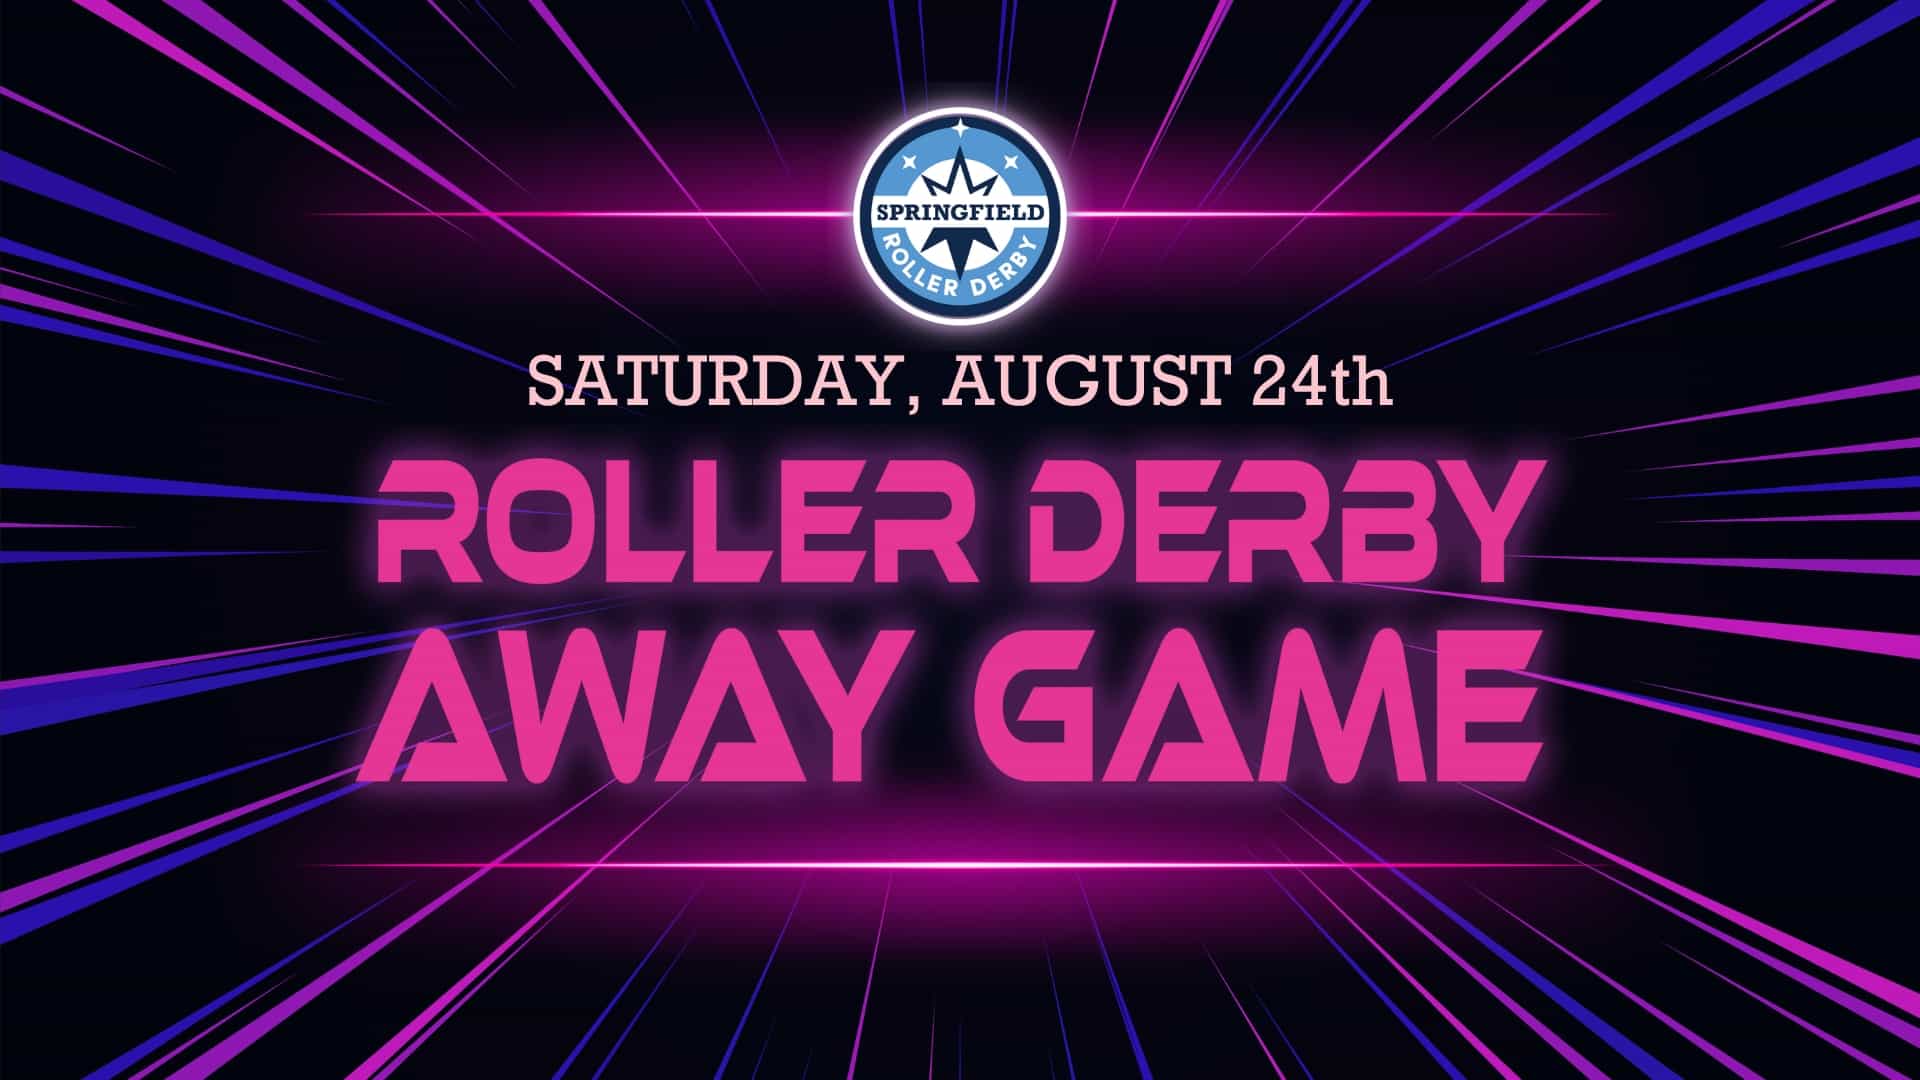 Image of black background with lasers and SRD logo. Texts reads Saturday, August 24th Roller Derby Away Game.